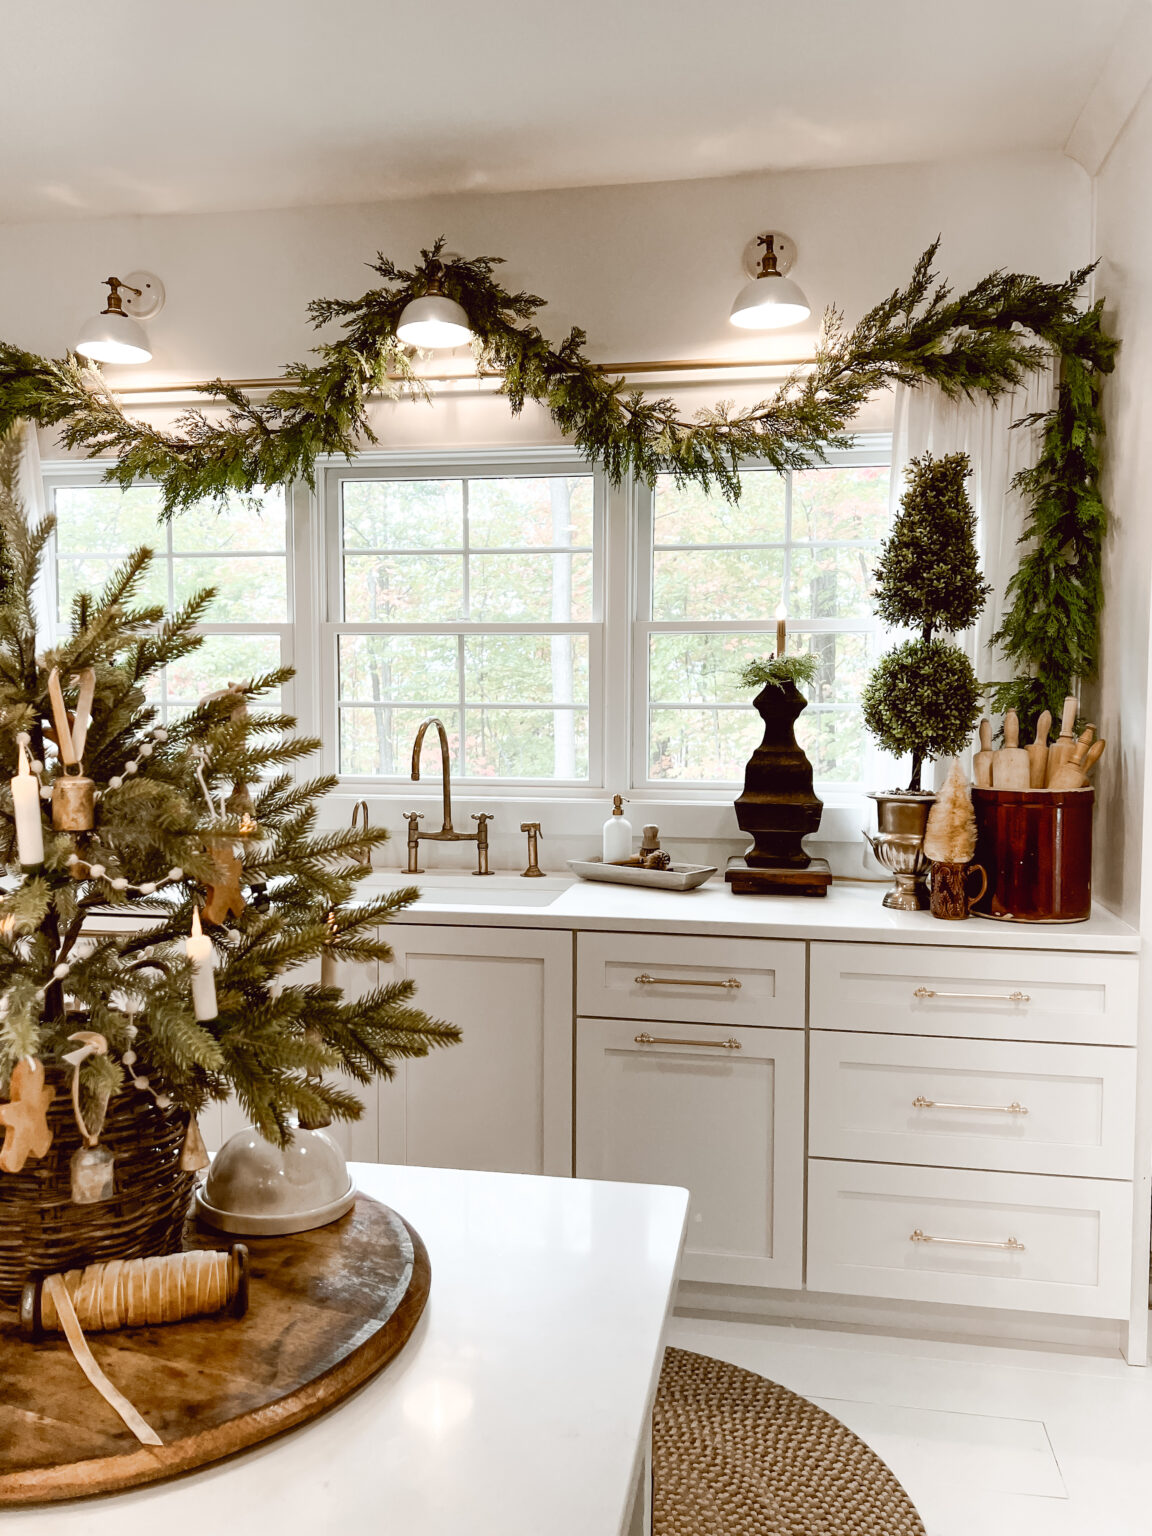 A Christmas Woodland Look in the Kitchen - Deb and Danelle